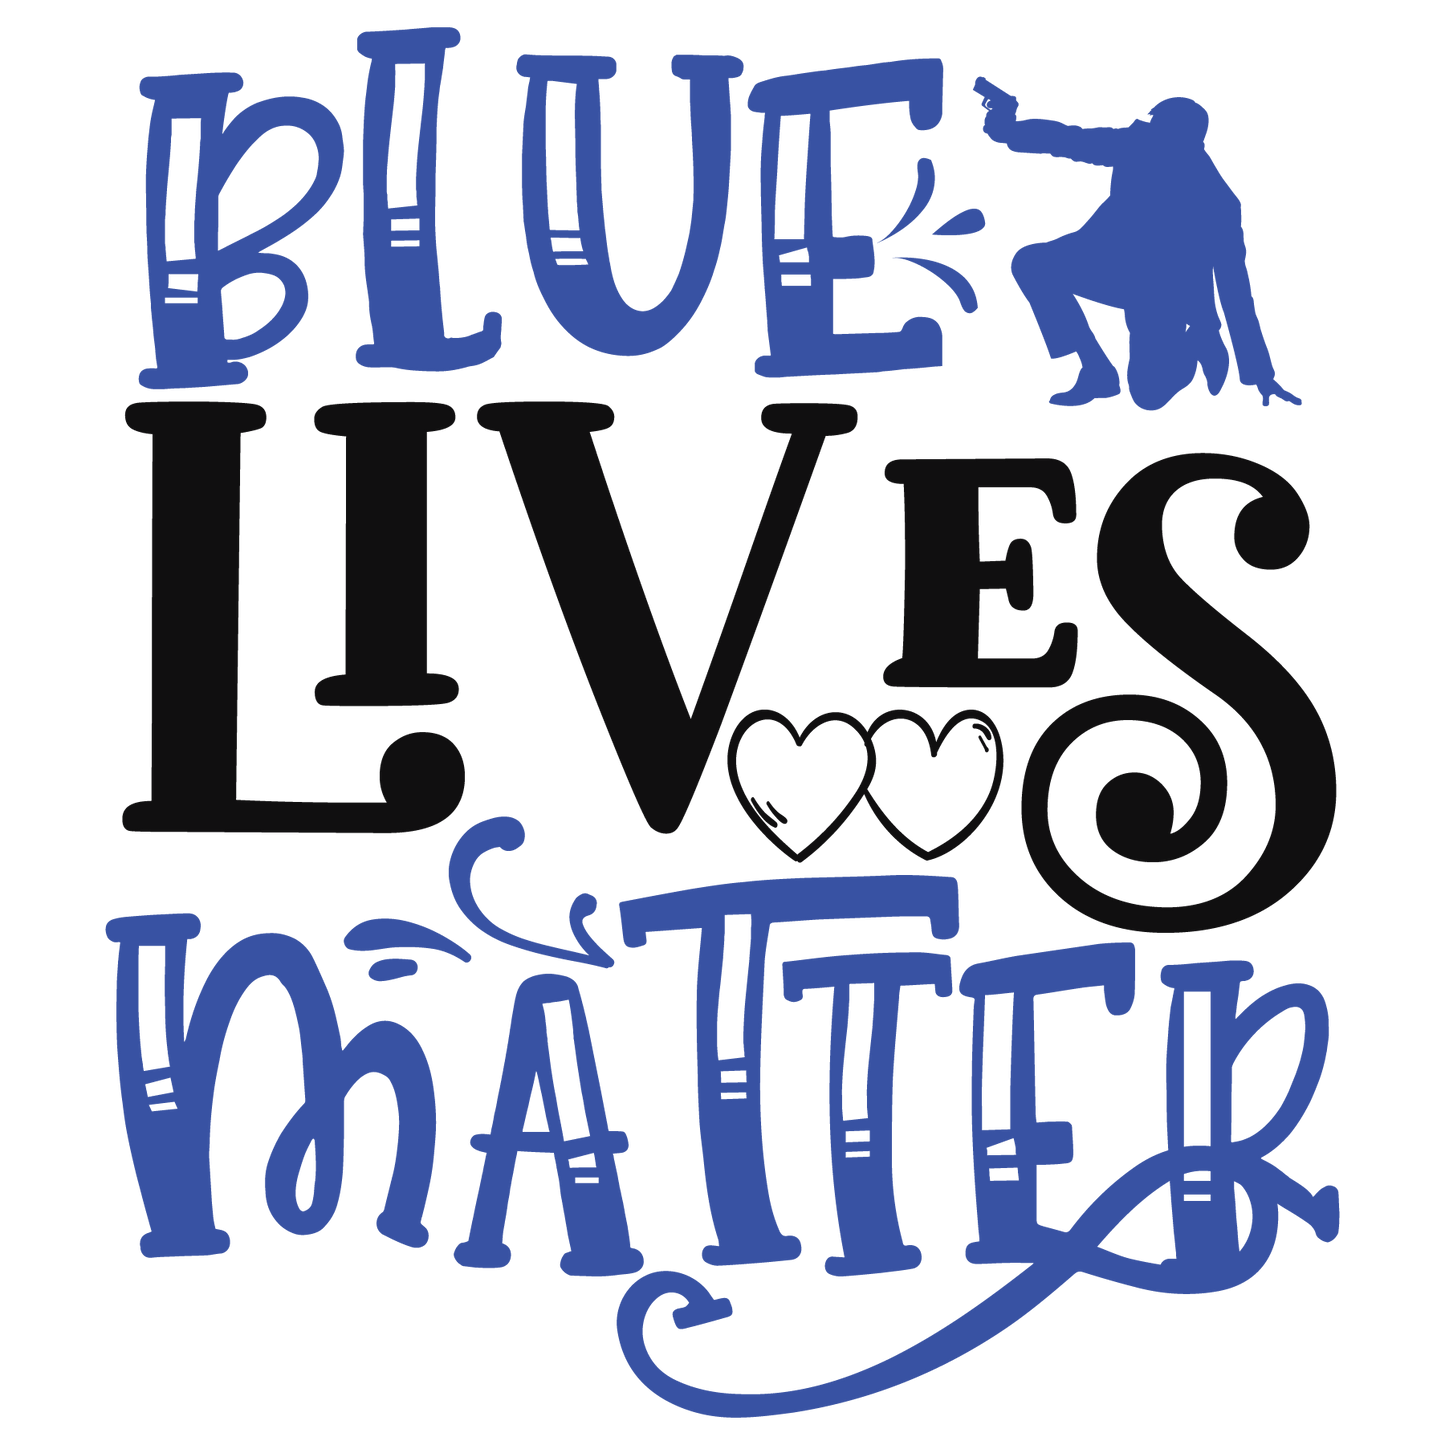 Blue Lives Matter Coffee Mug - Home of Buy 3, Get 1 Free. Long Lasting Custom Designed Coffee Mugs for Business and Pleasure. Perfect for Christmas, Housewarming, Wedding Party gifts